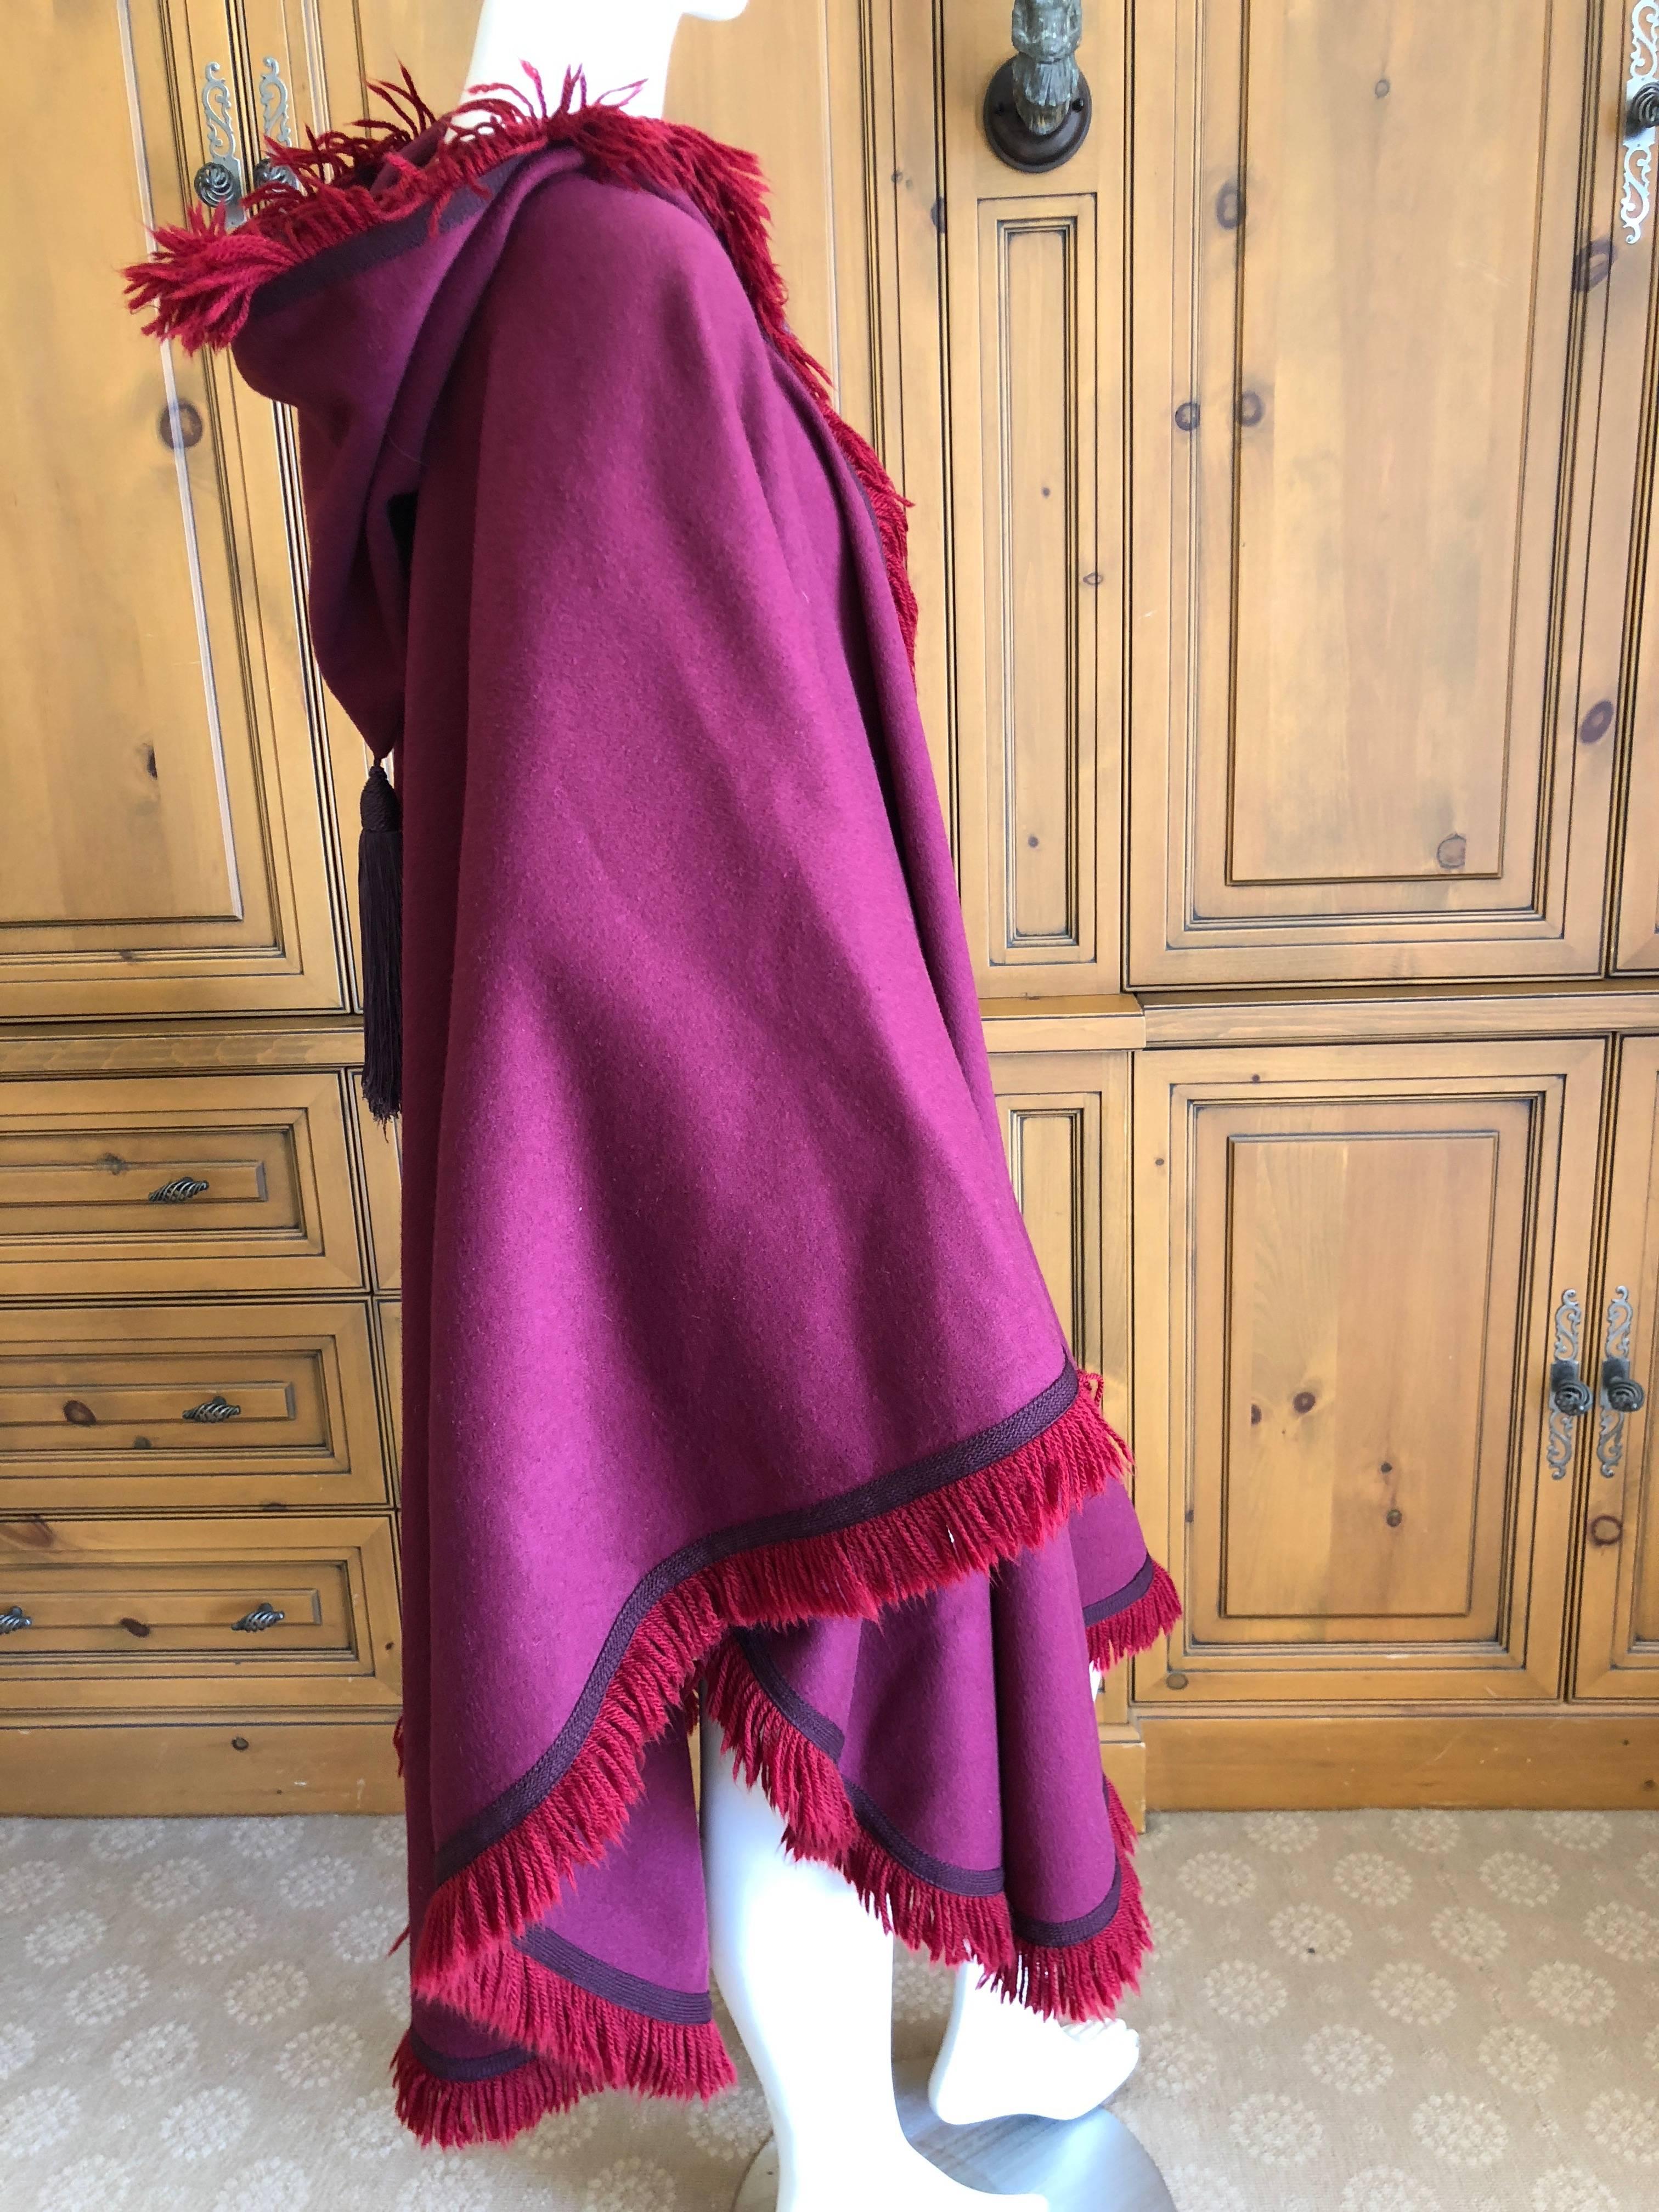 Yves Saint Laurent Rive Gauche Fringed Fuchsia Cape with Hood and Tassel For Sale 4